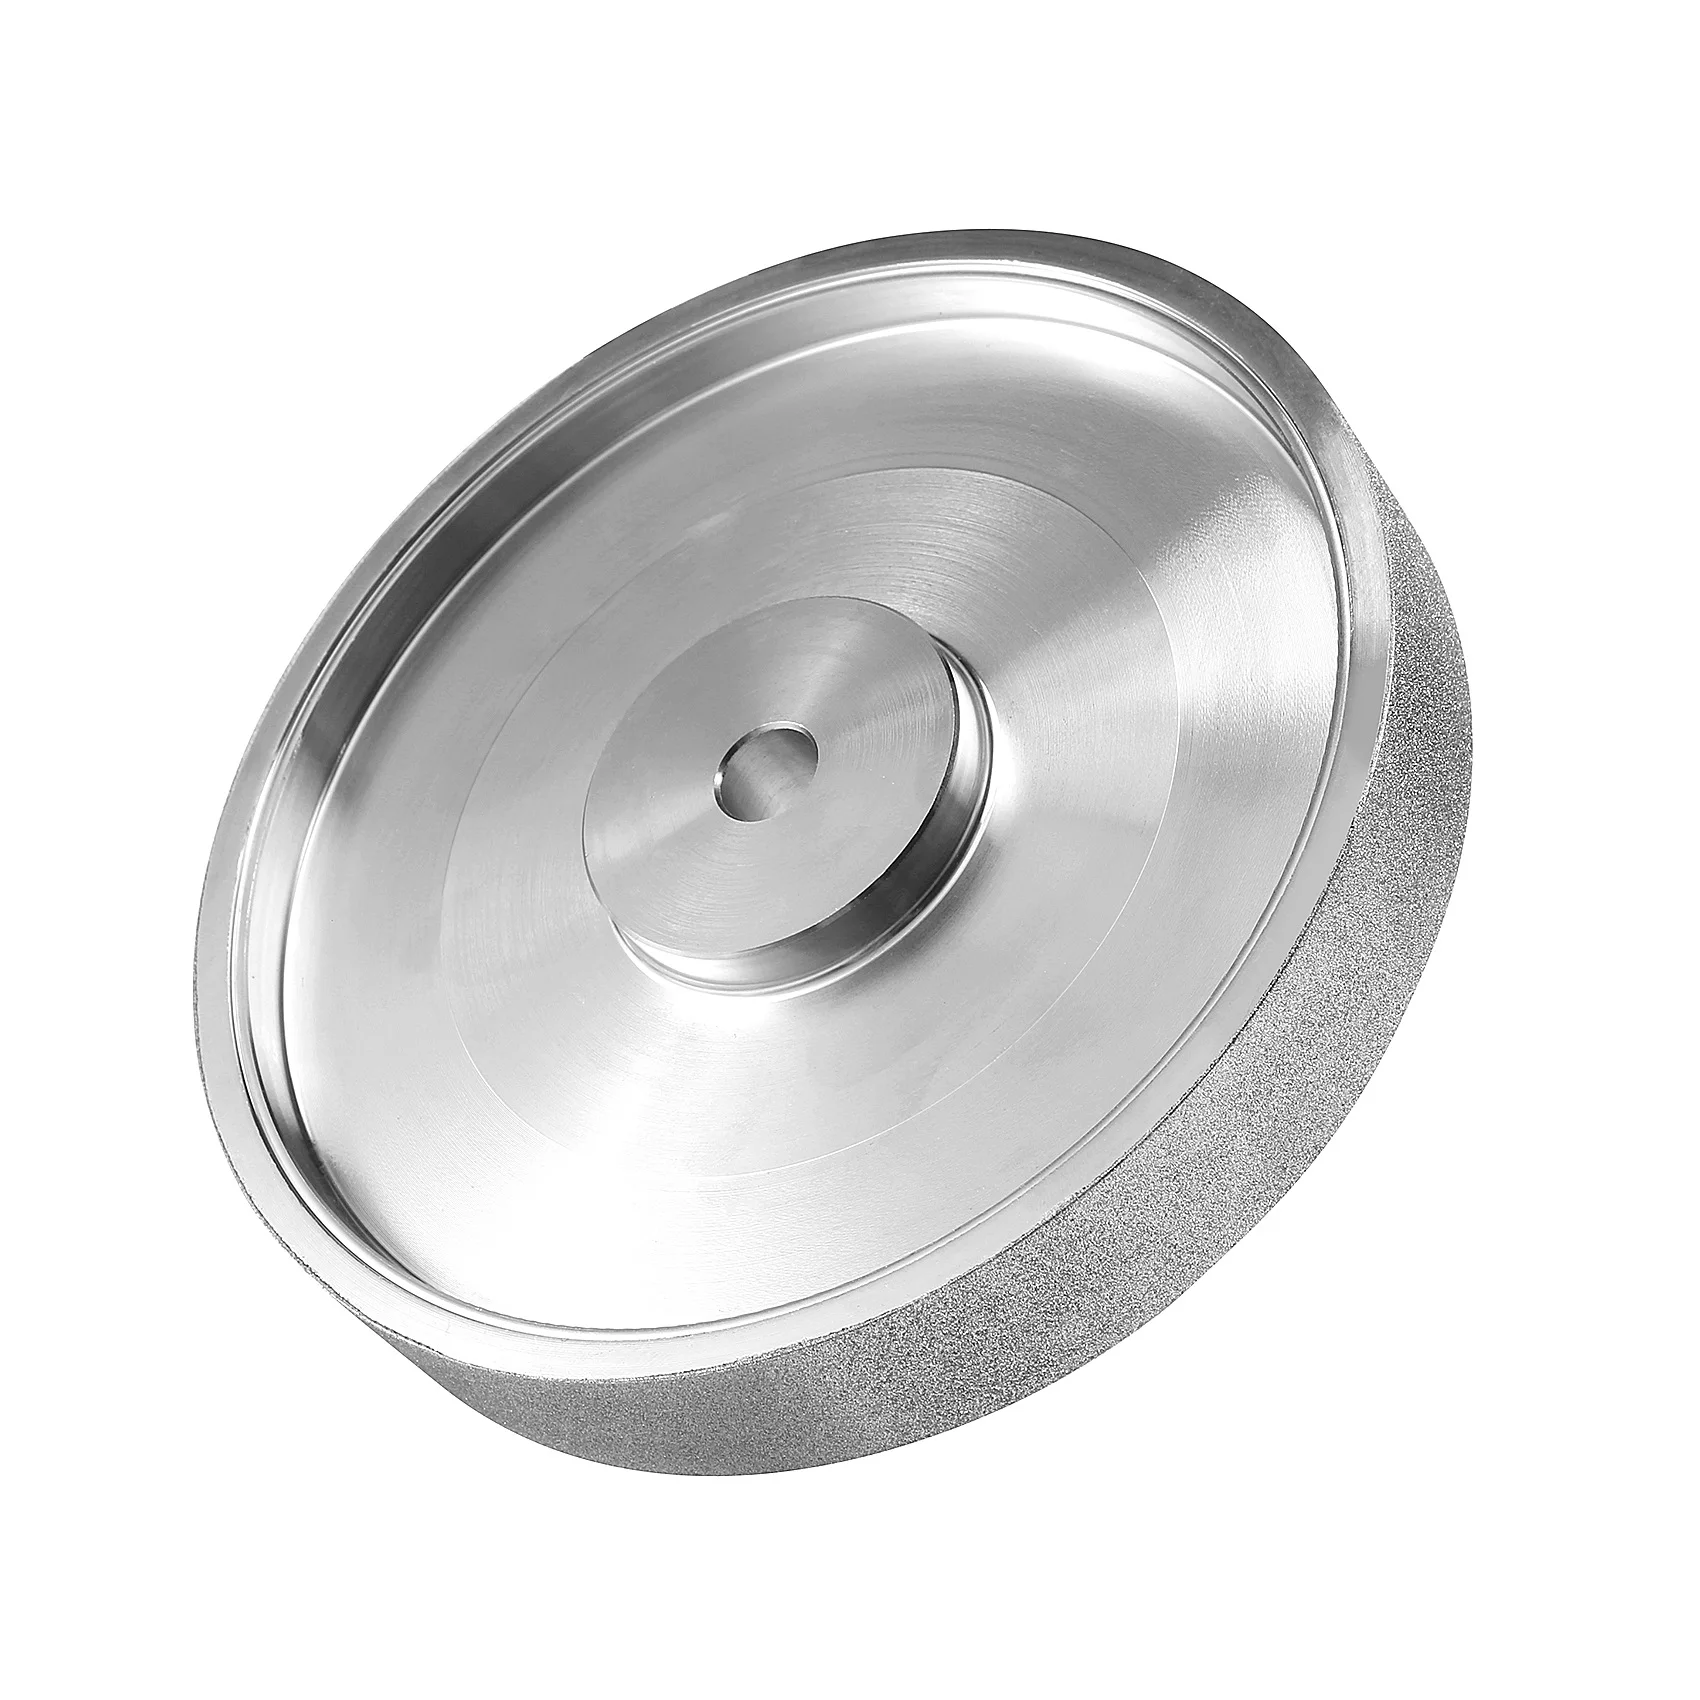 

CBN Grinding Wheel, 6Inch Dia x 1Inch Wide, with 1/2Inch Arbor, Diamond Grinding Wheel for Sharpening HSS, 240 Grit